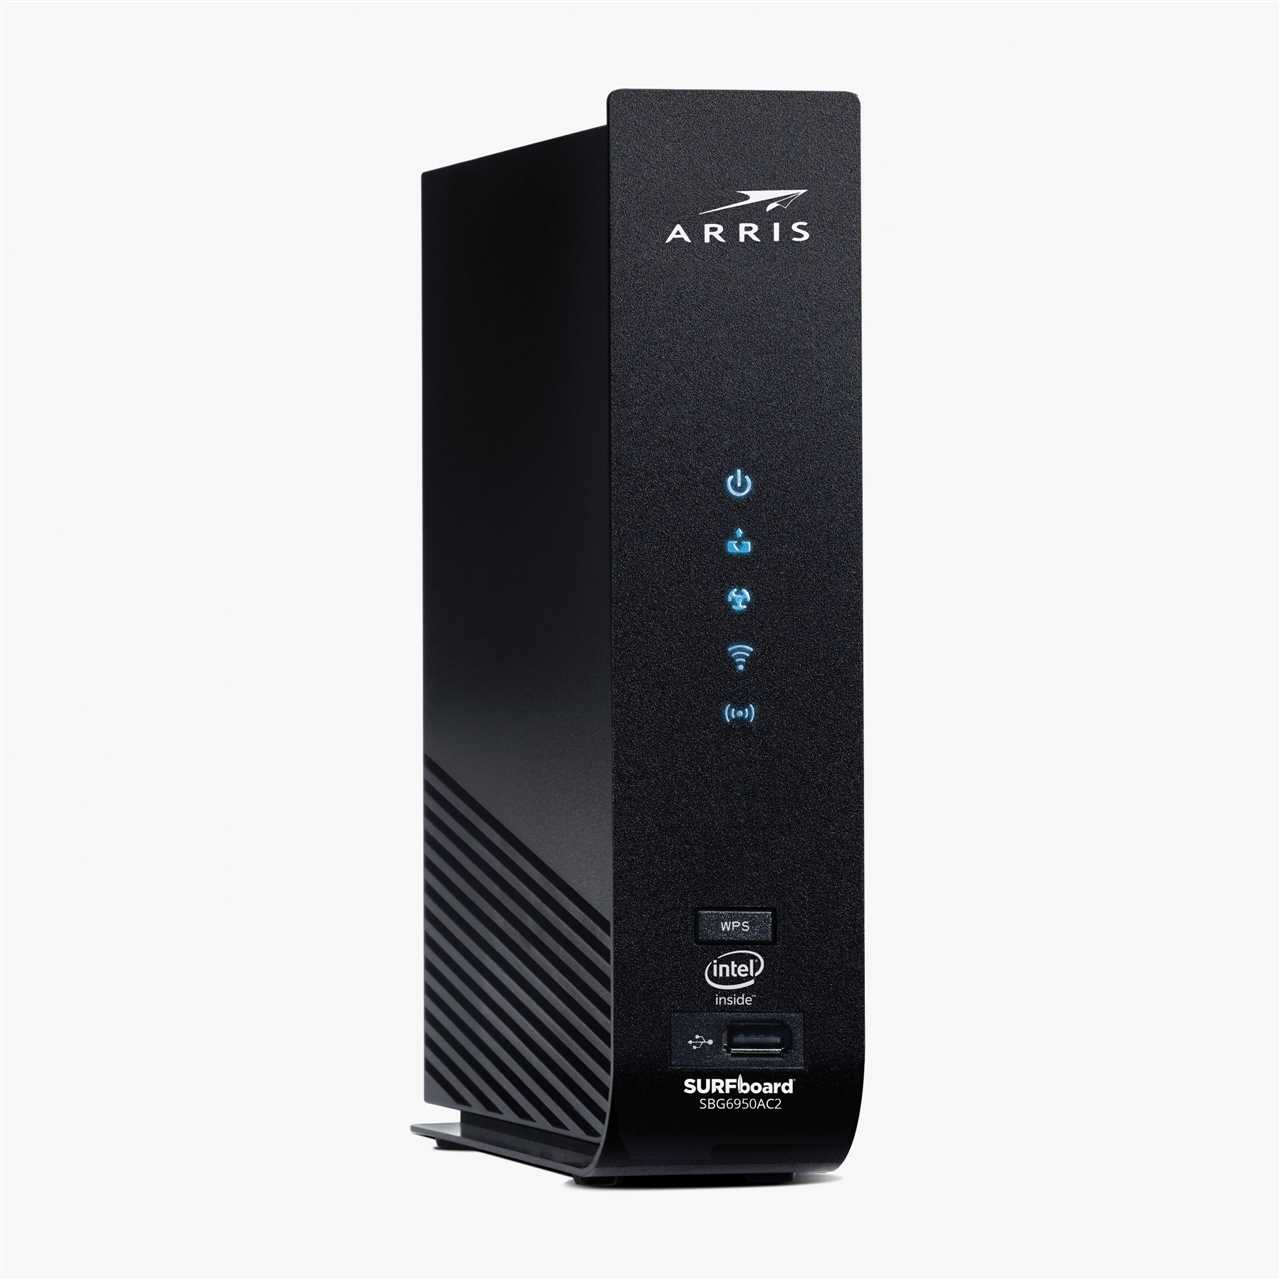 Connecting Your Arris Modem to the Internet